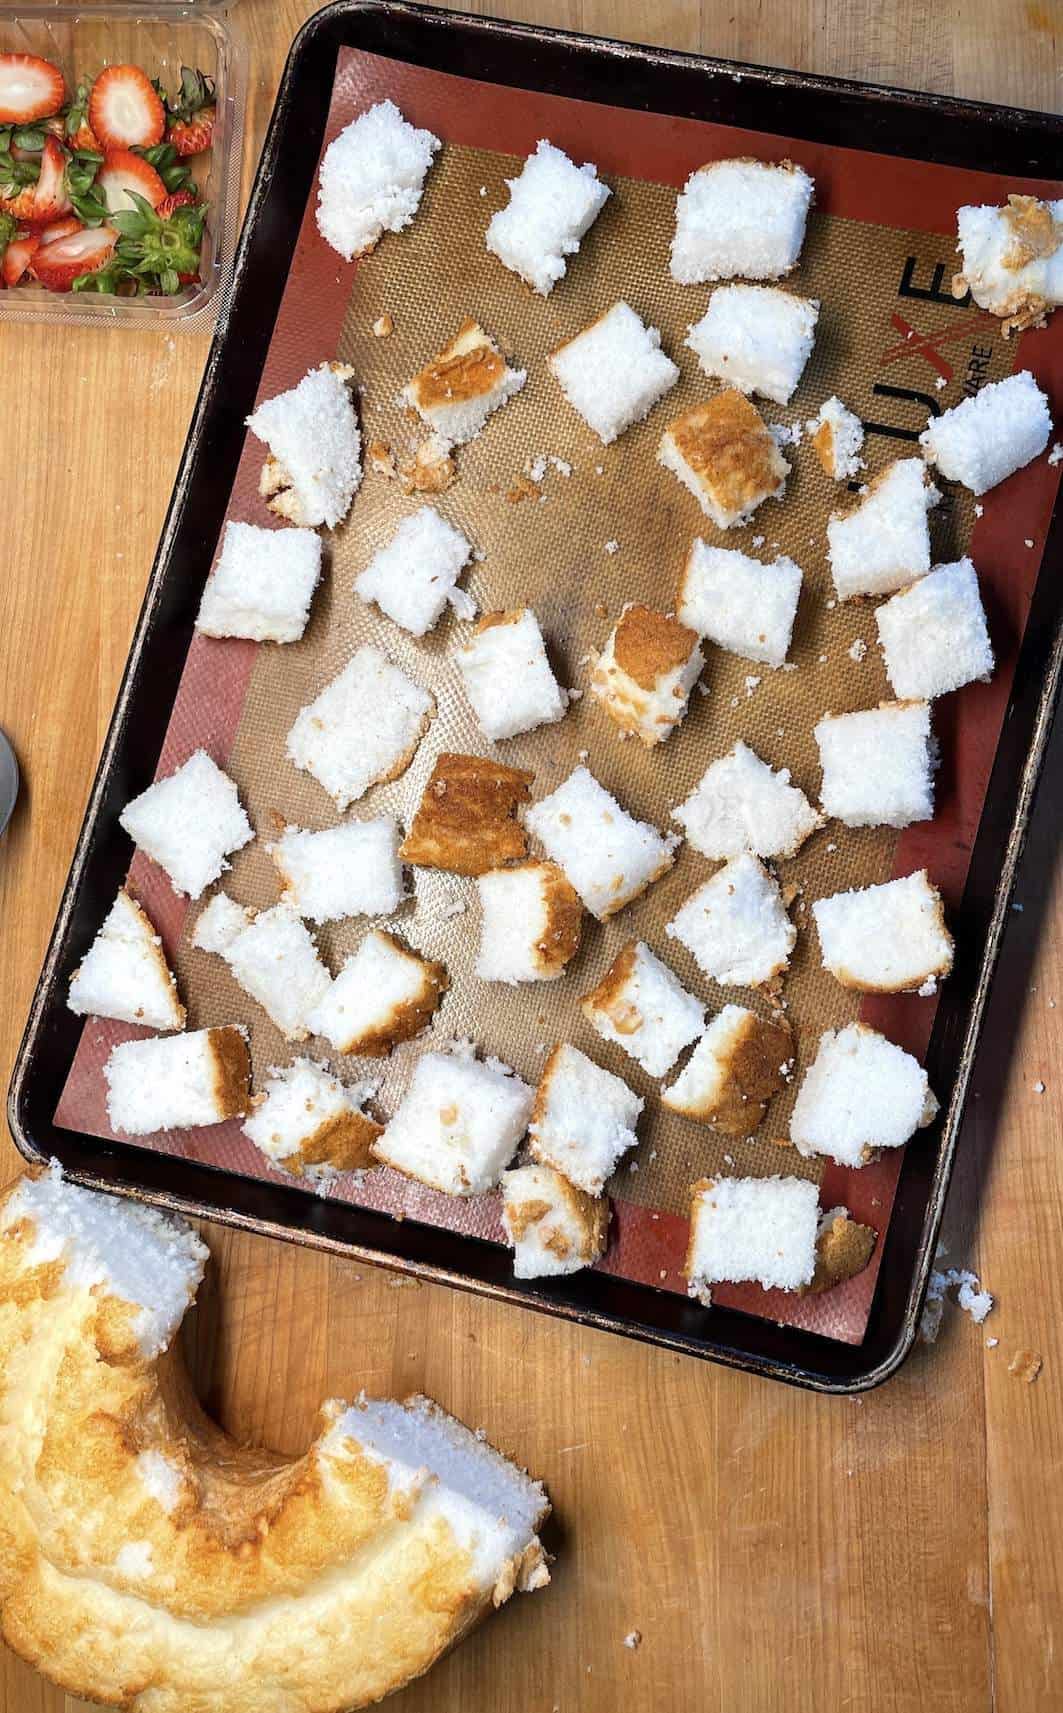 Angel food cake cut into cubes on a bake sheet before toasting to make shortcakes.